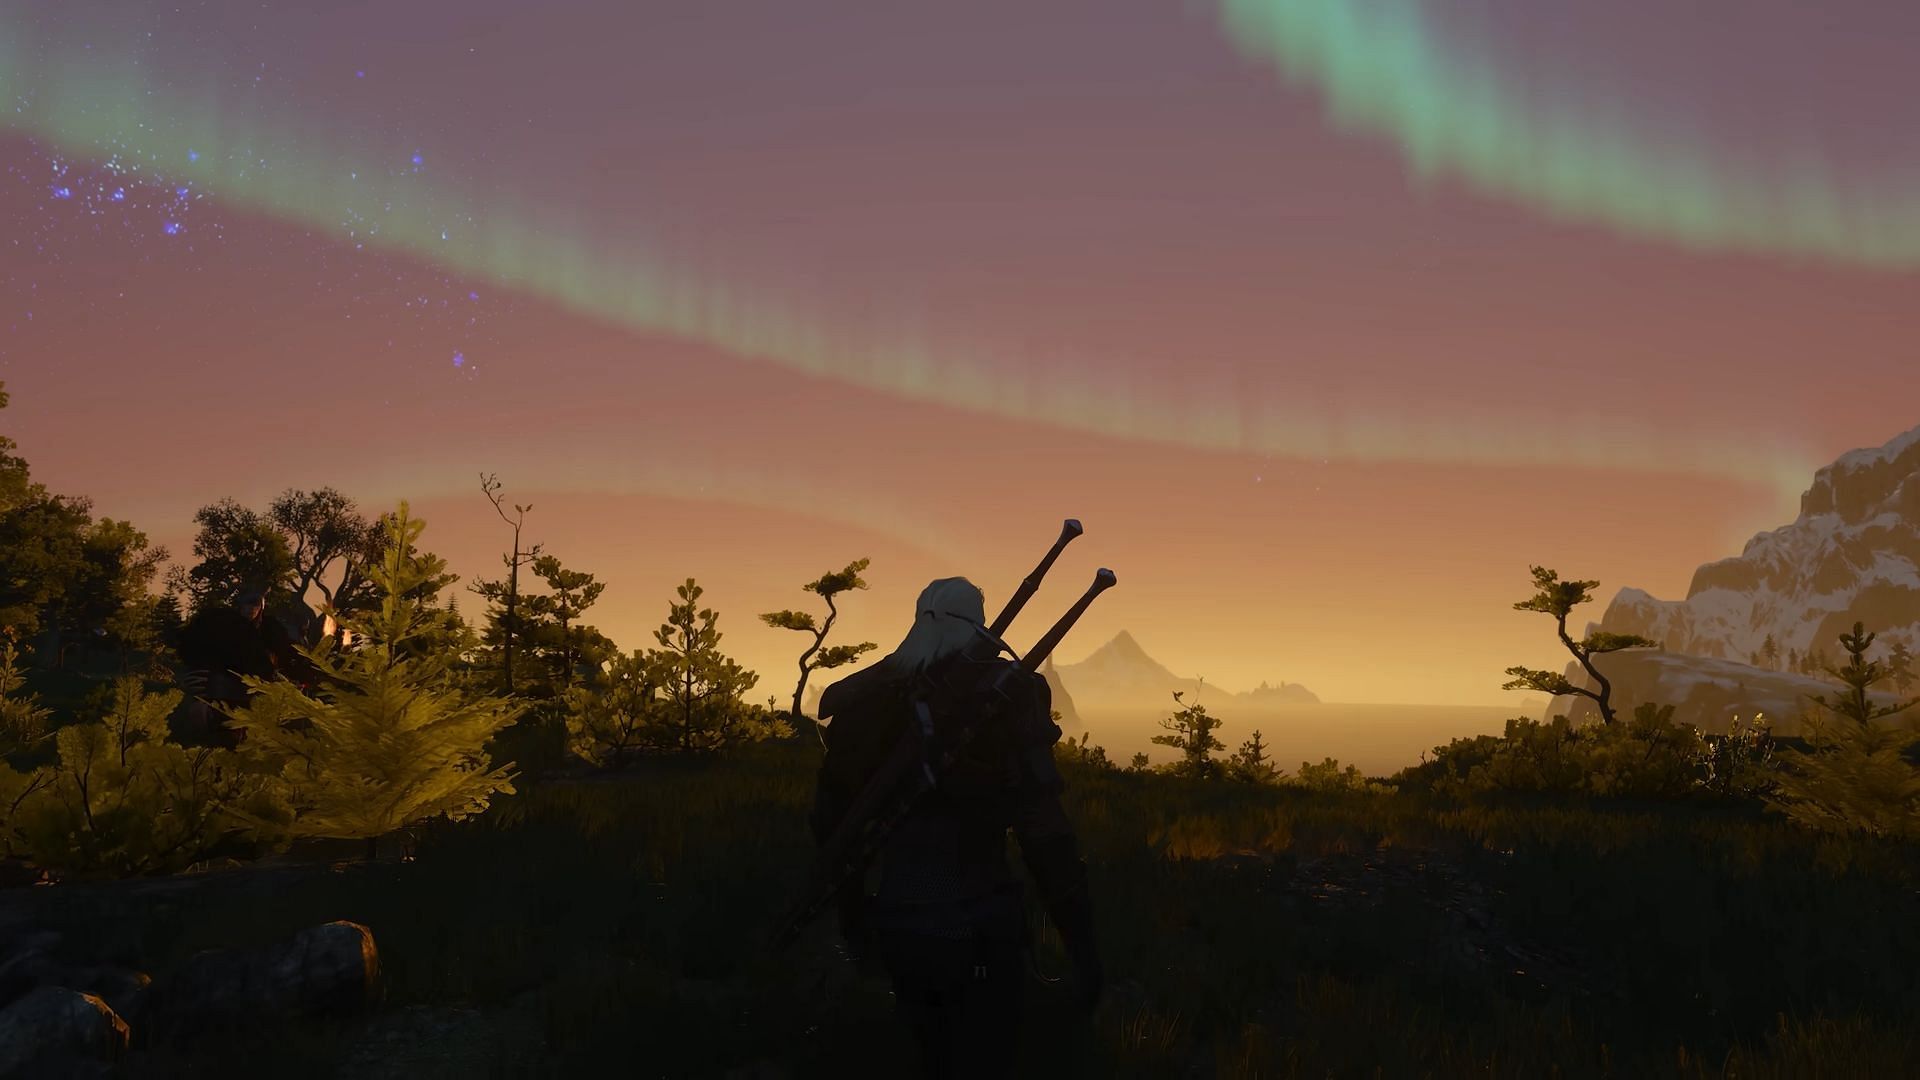 Ranking the strongest weapons in The Witcher 3